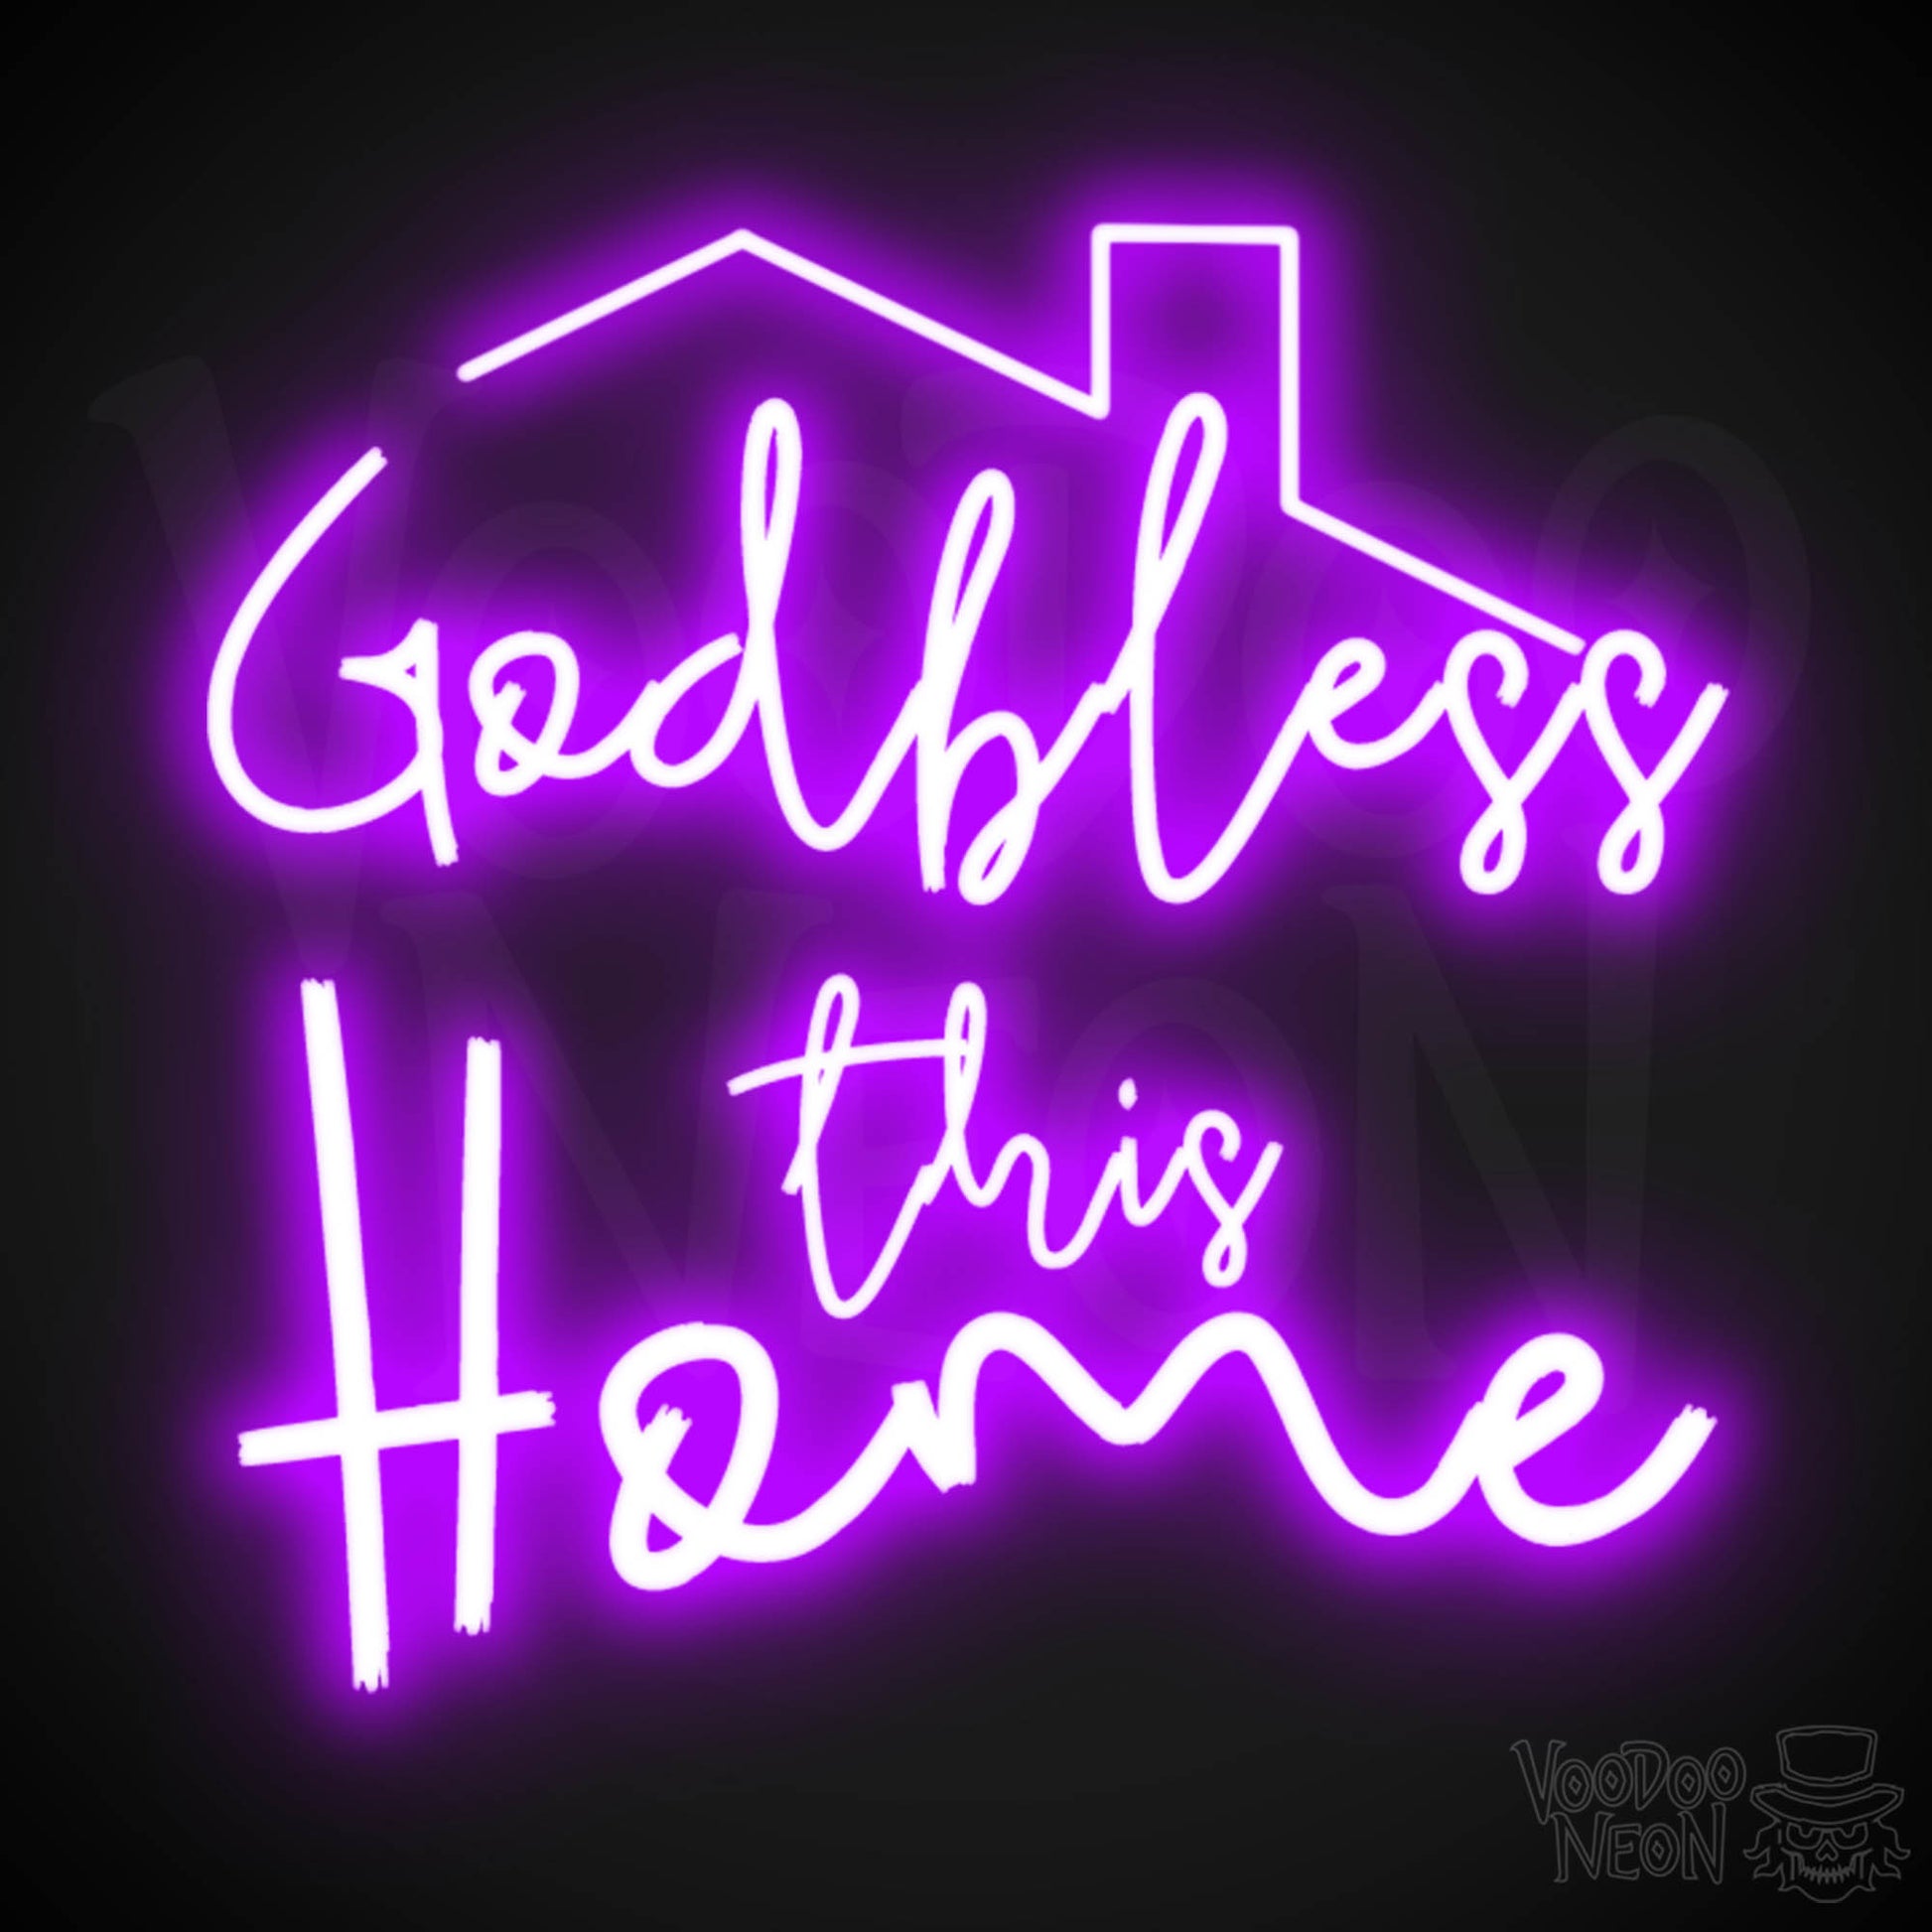 God Bless This House Neon Sign - Neon God Bless This House Sign - Wall Art - Light Up Sign - Color Purple